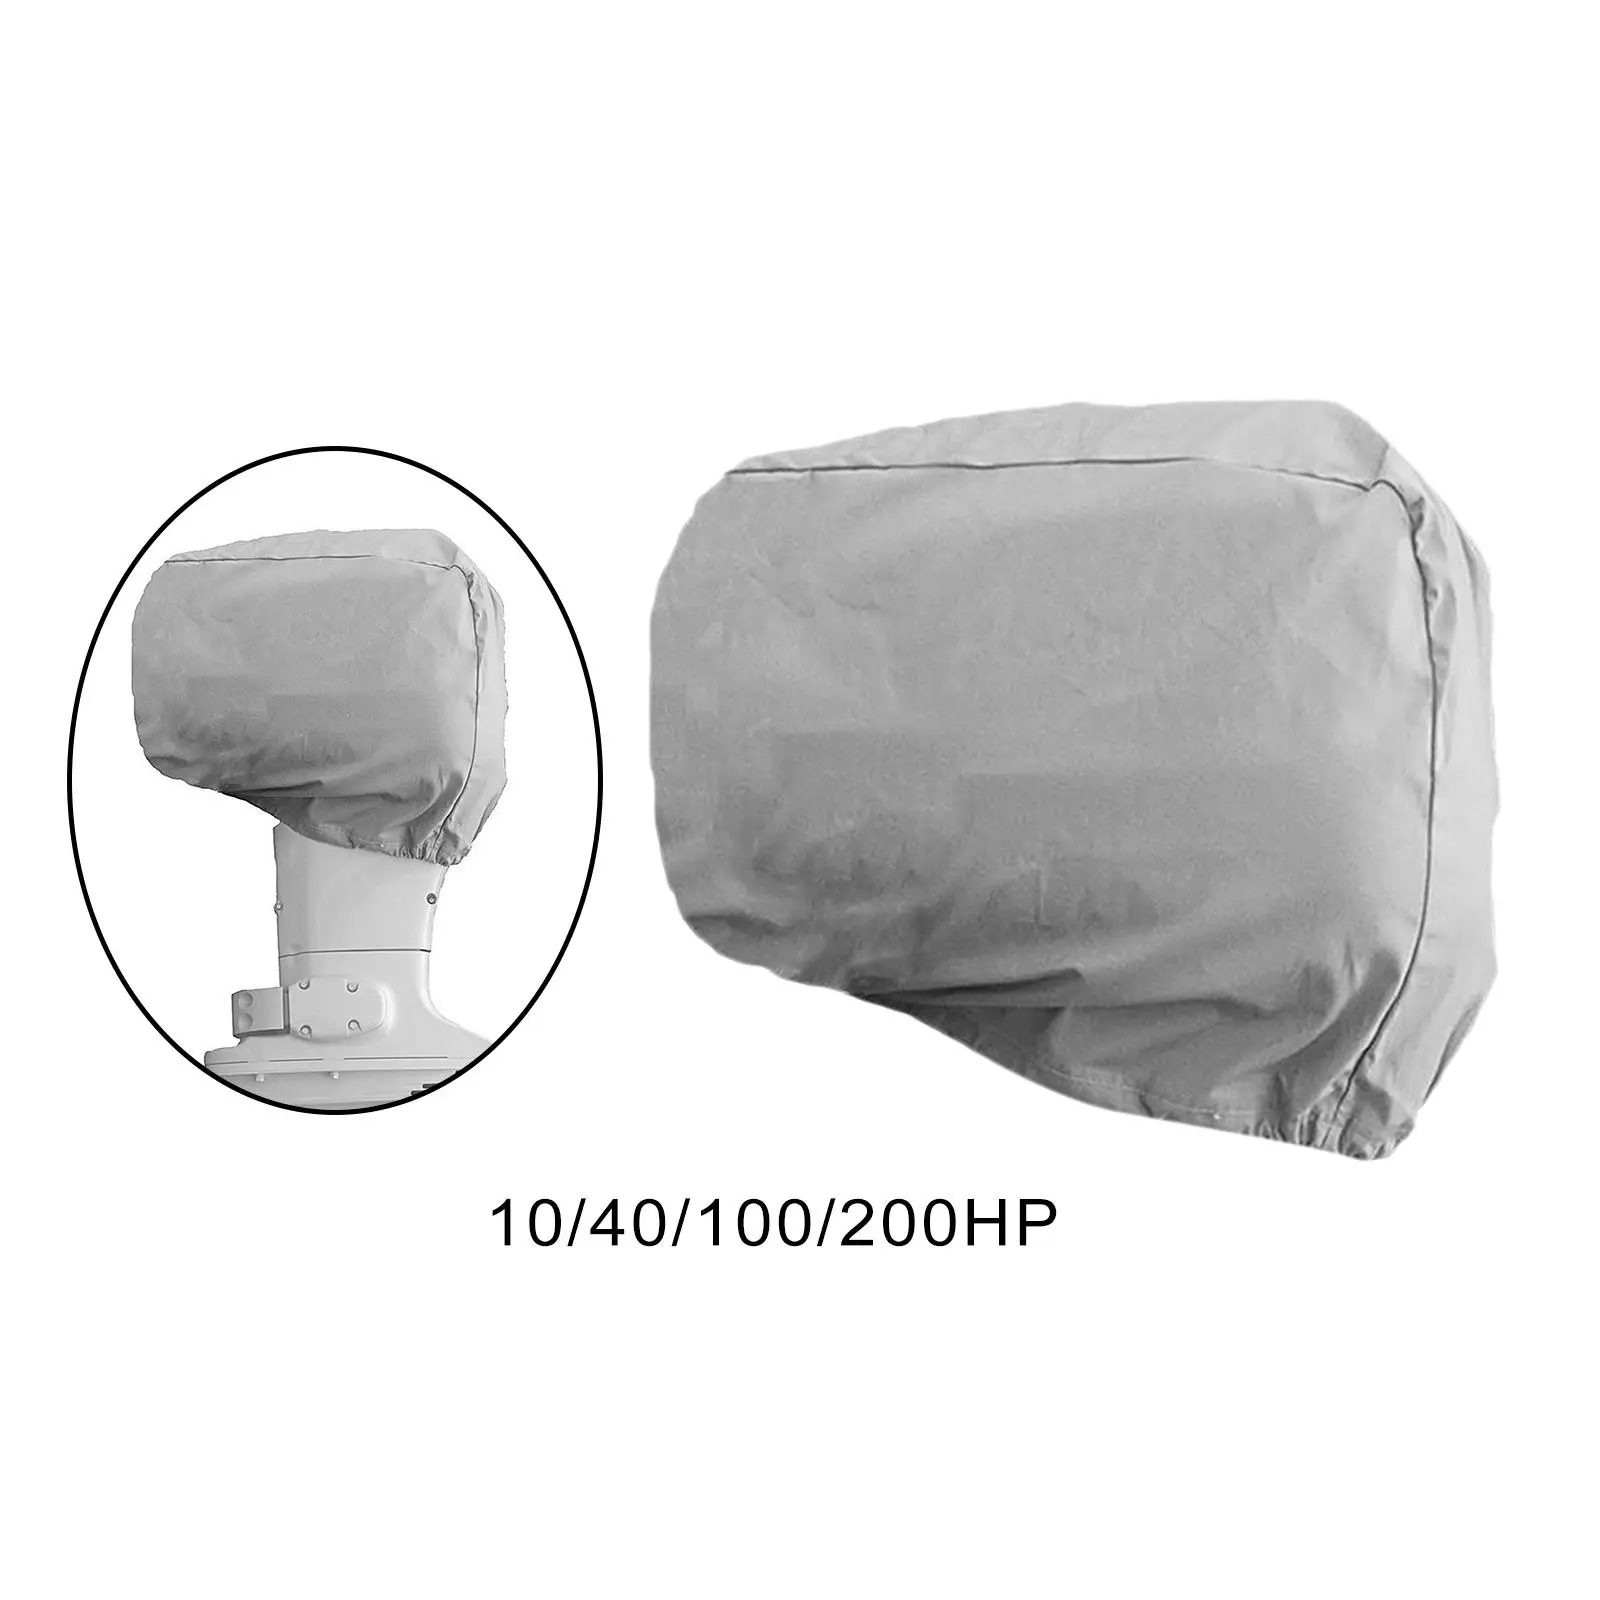 Boat Hood Covers Waterproof Portable Tear Resistant Outboard Motor Cover for Sea